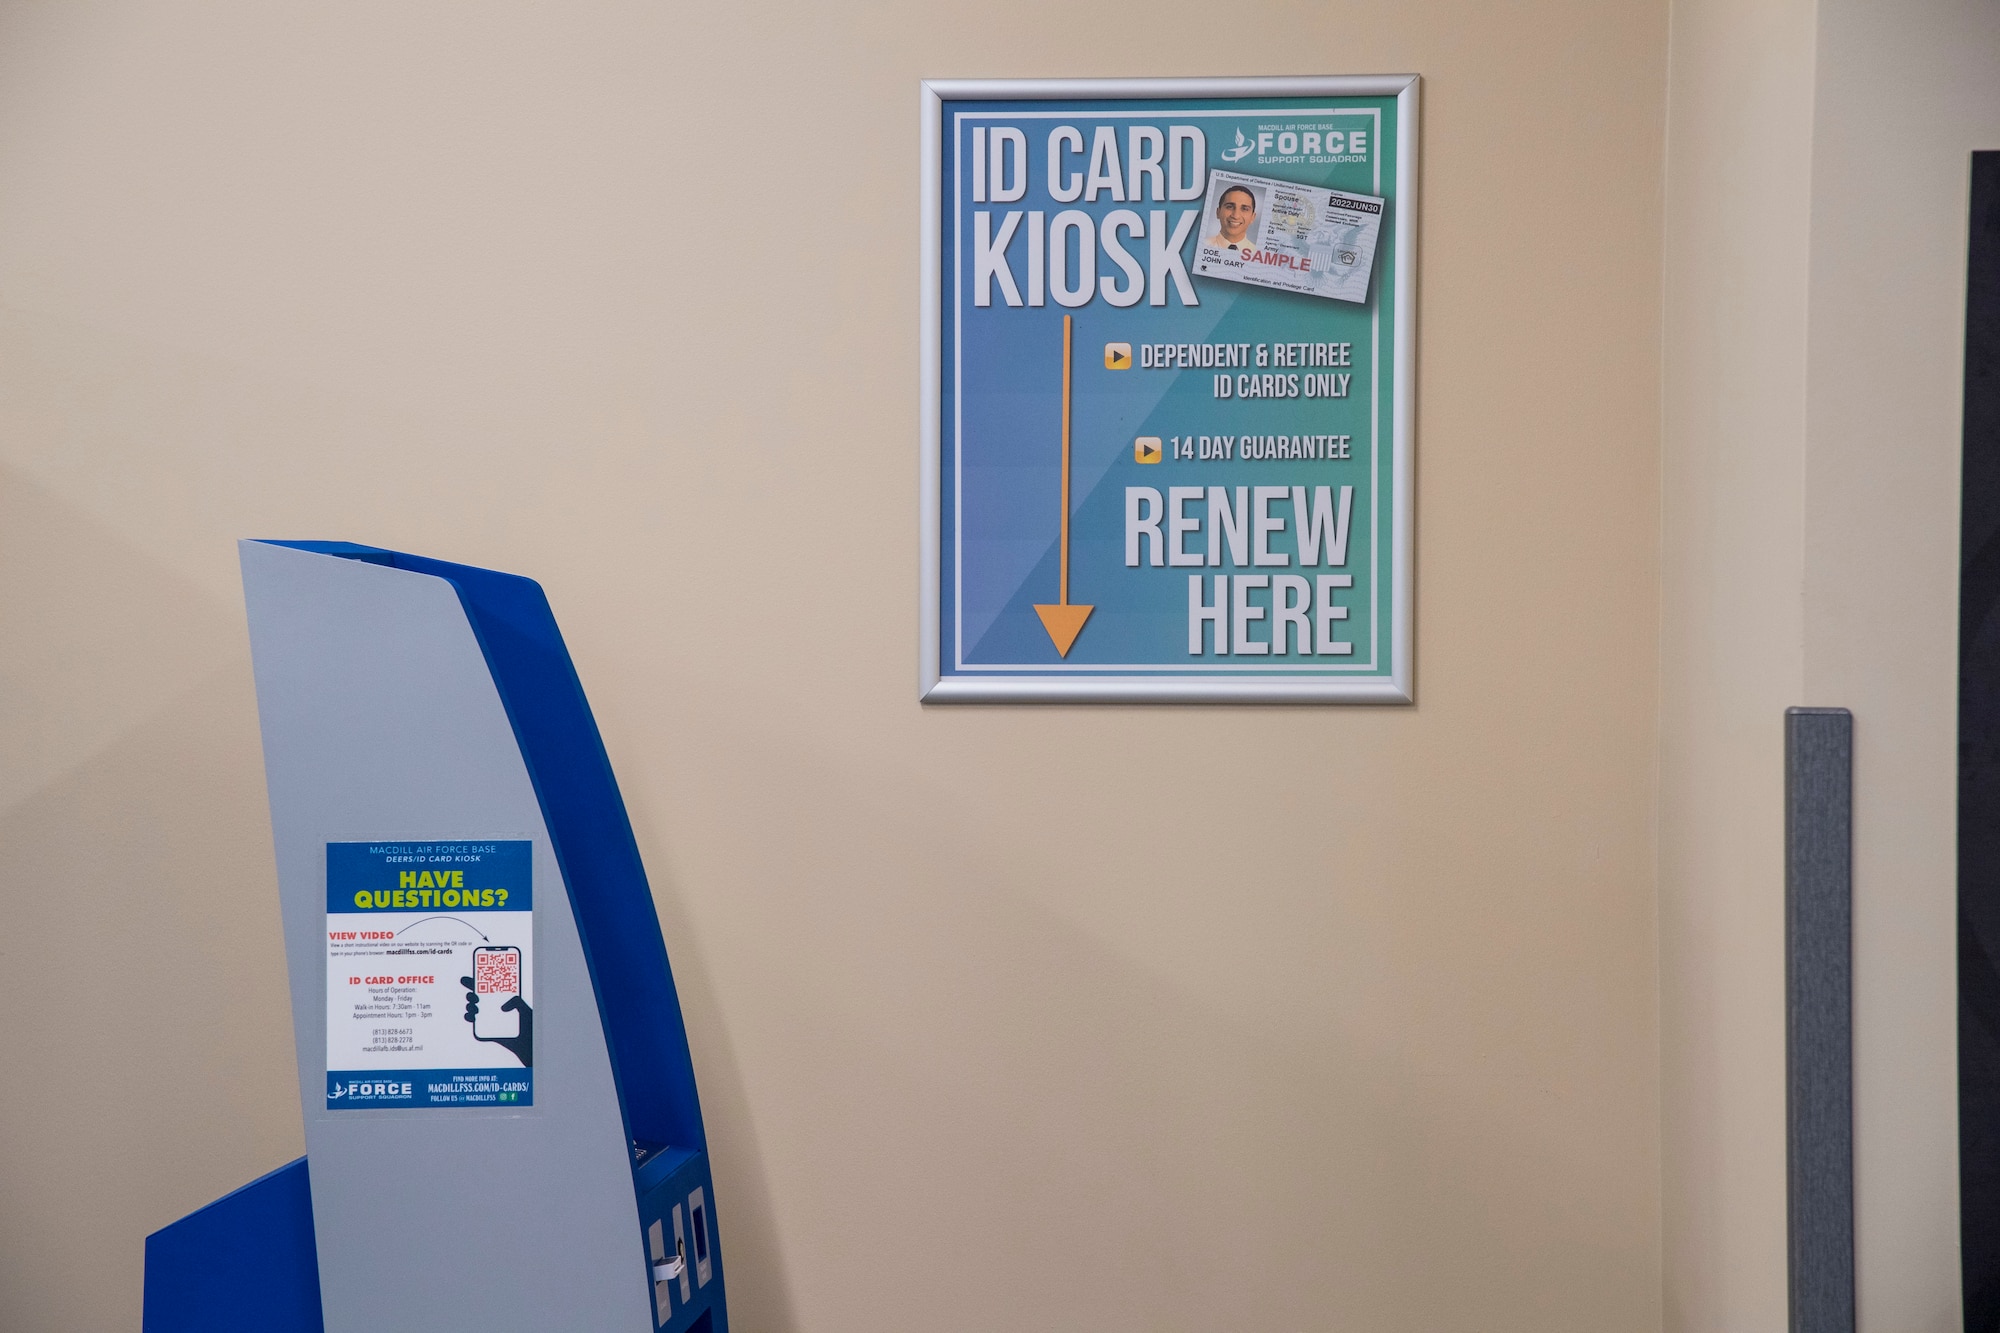 A 6th Force Support Squadron ID Card Kiosk sits by the food court inside the Base Exchange at MacDill Air Force Base, Fla., April 16, 2021.